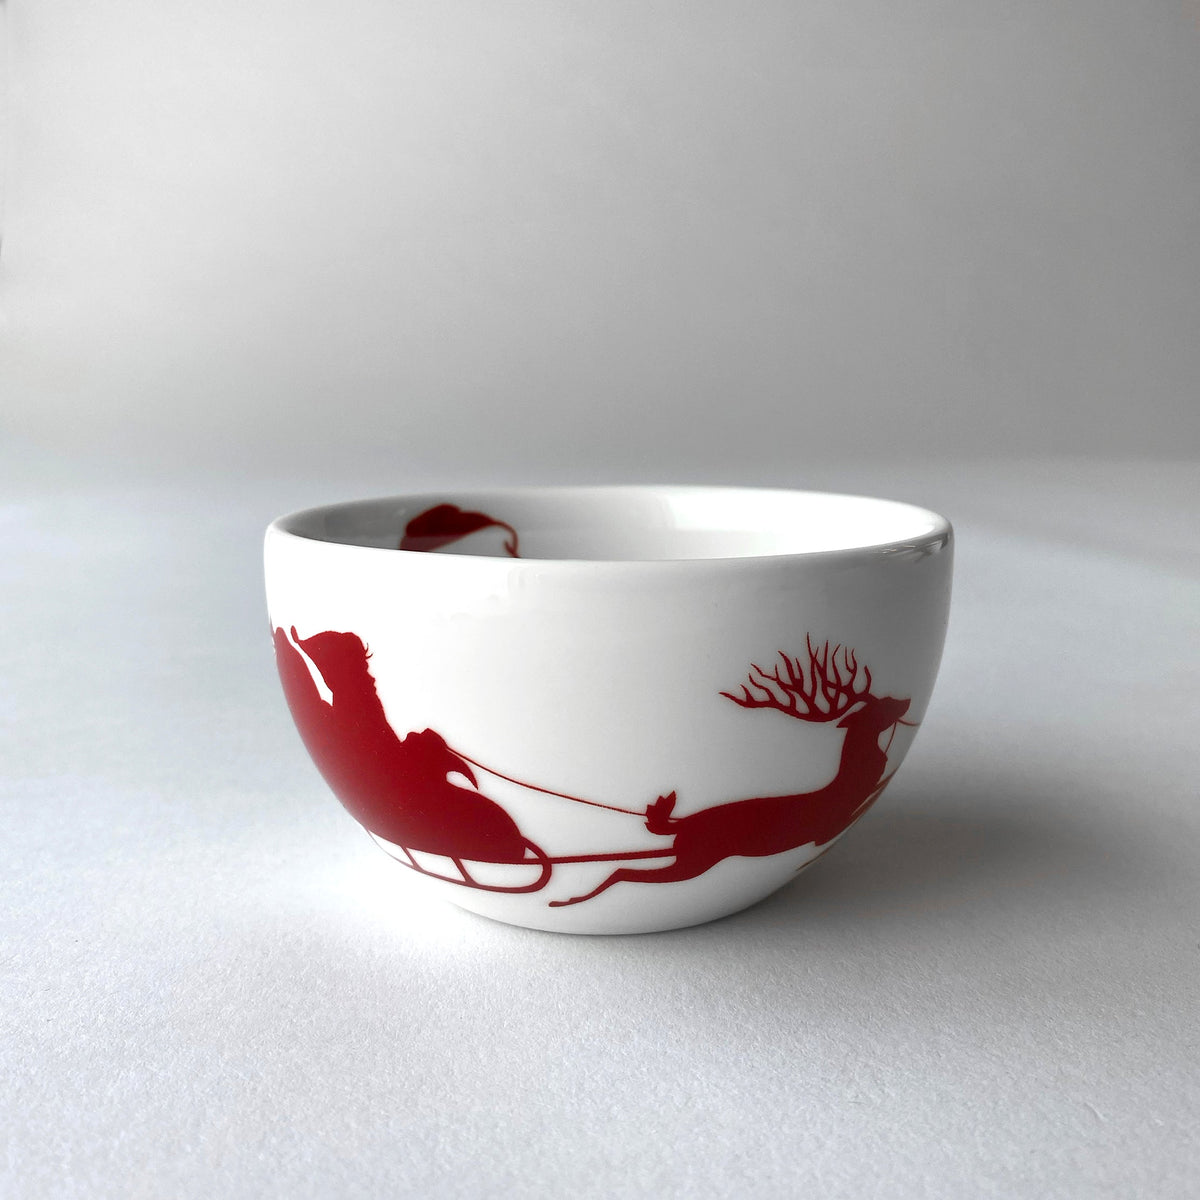 A Sleigh Snack Bowl by Caskata Artisanal Home, featuring Santa Claus and his reindeer, perfect for serving appetizers and spreading holiday spirits.